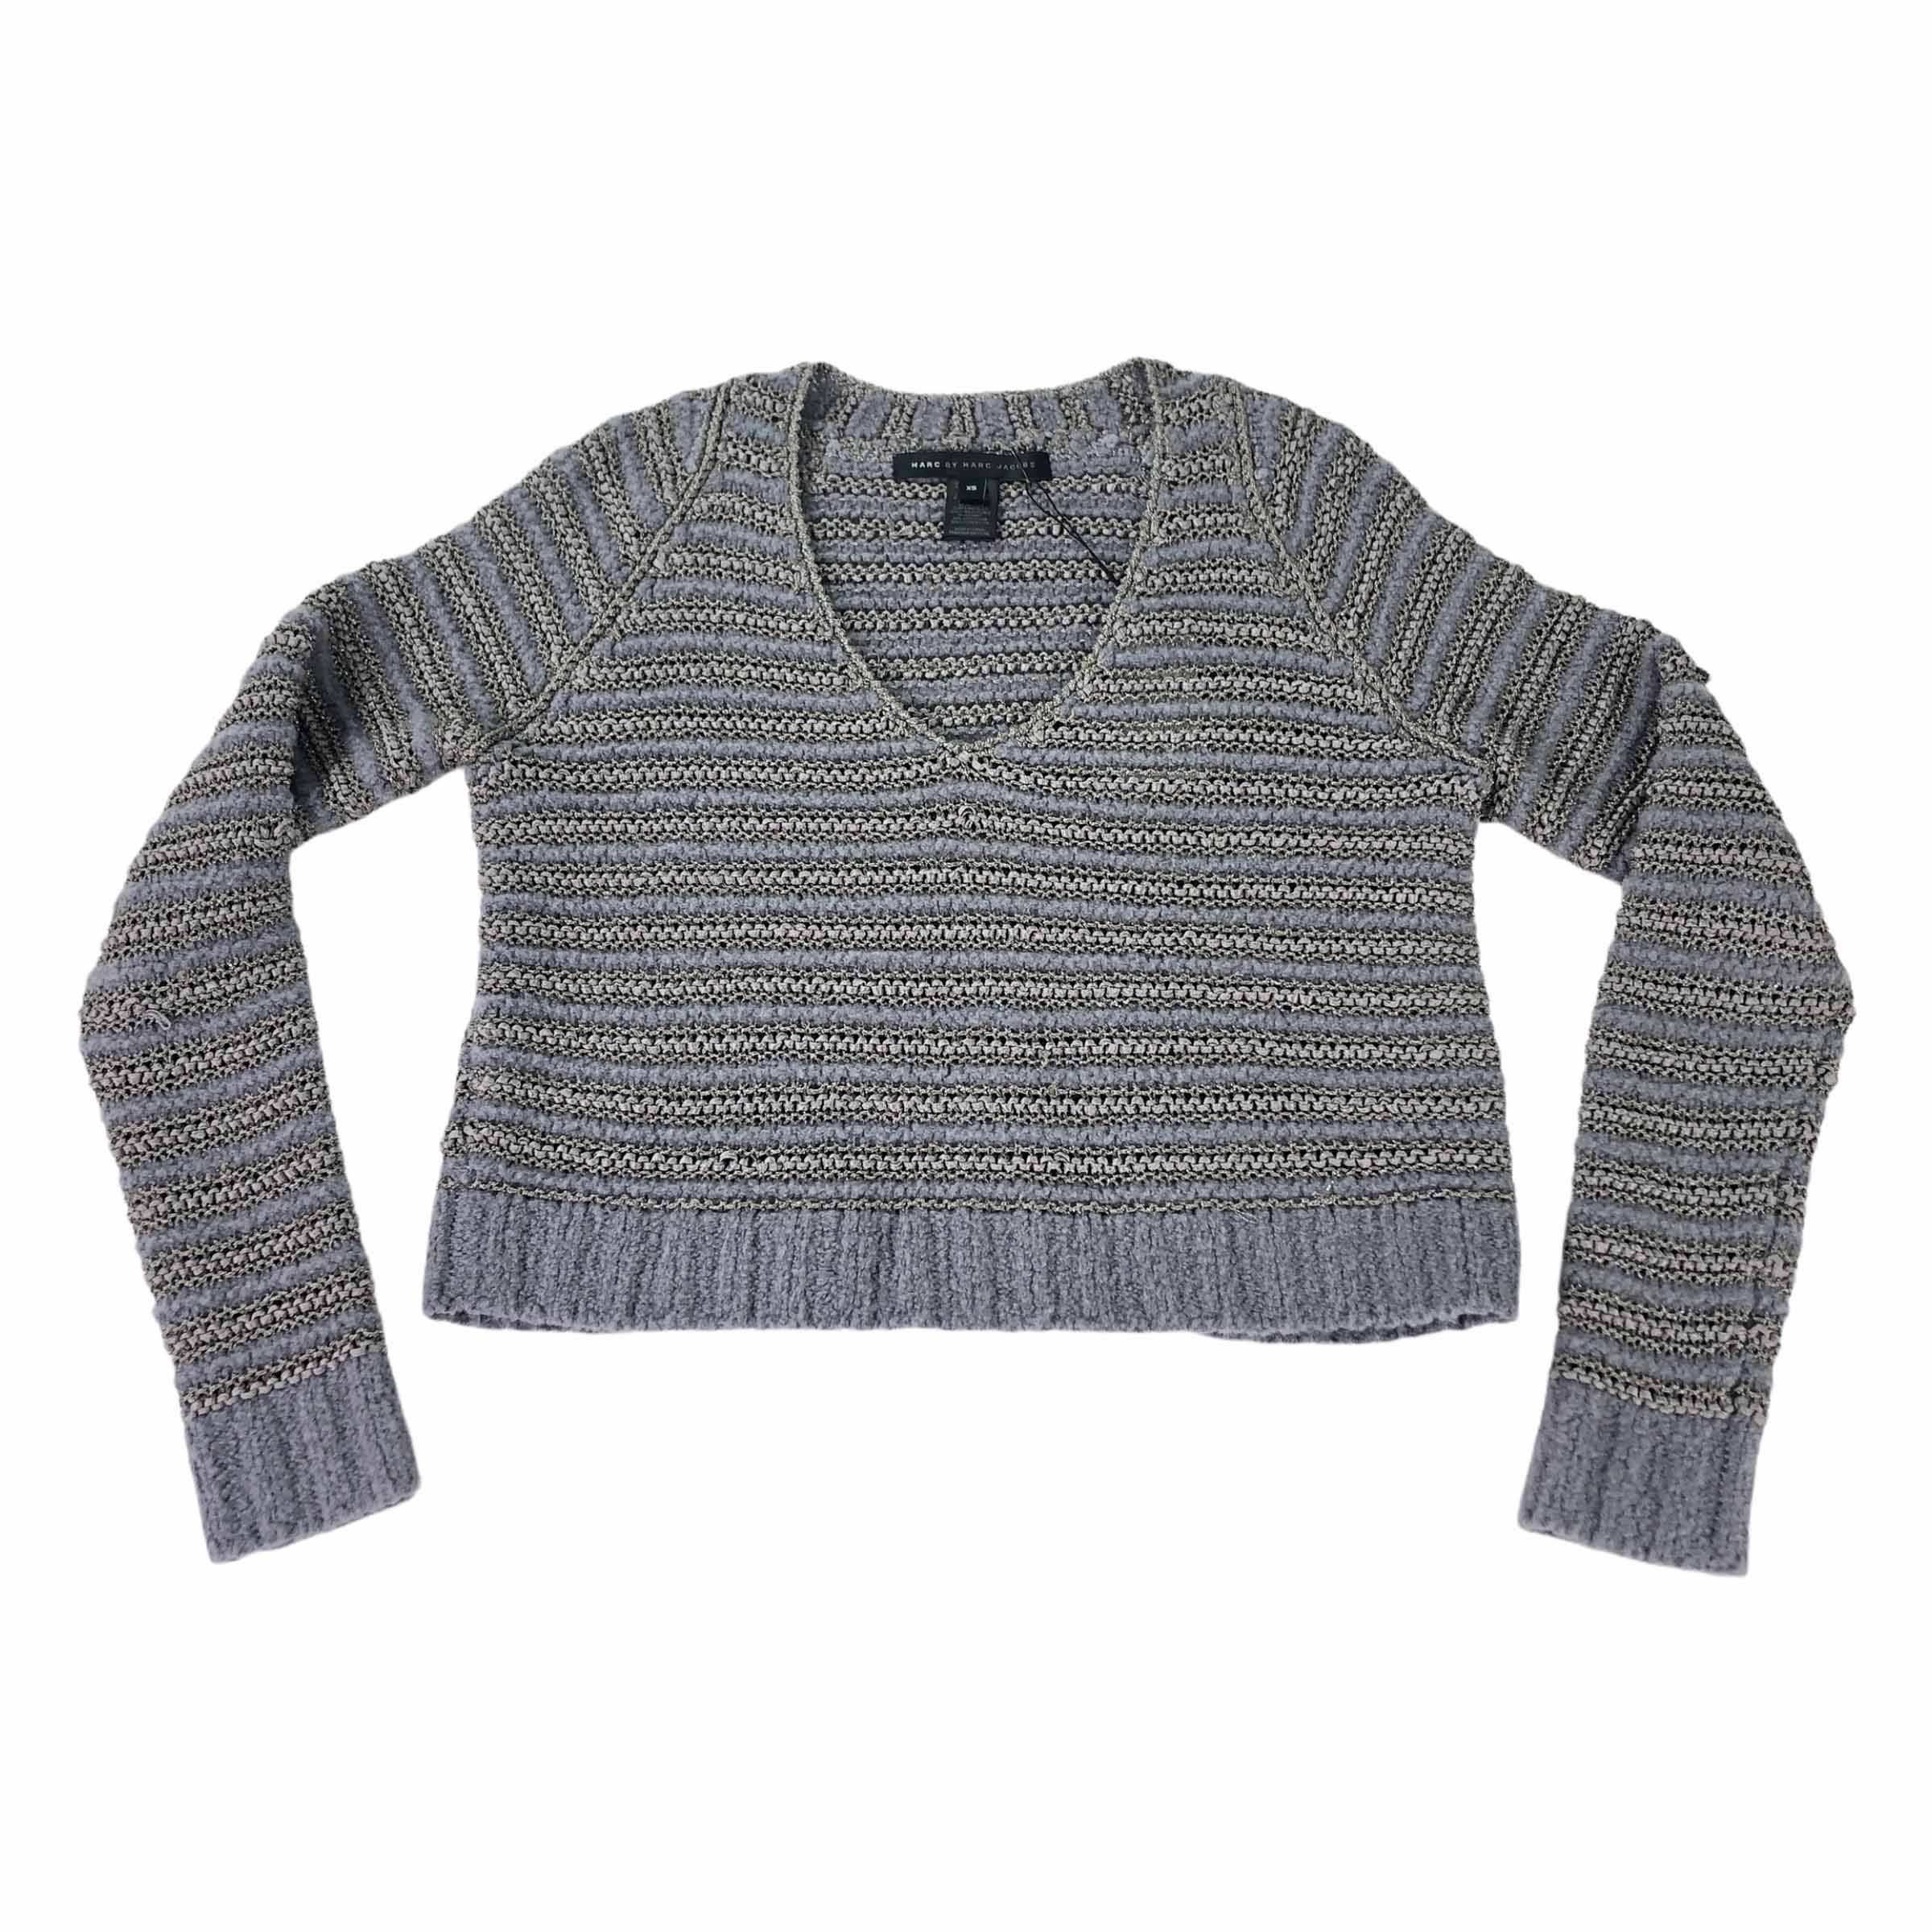 [Marc by Marc Jacobs] Rope Metalic Sweater - Size XS